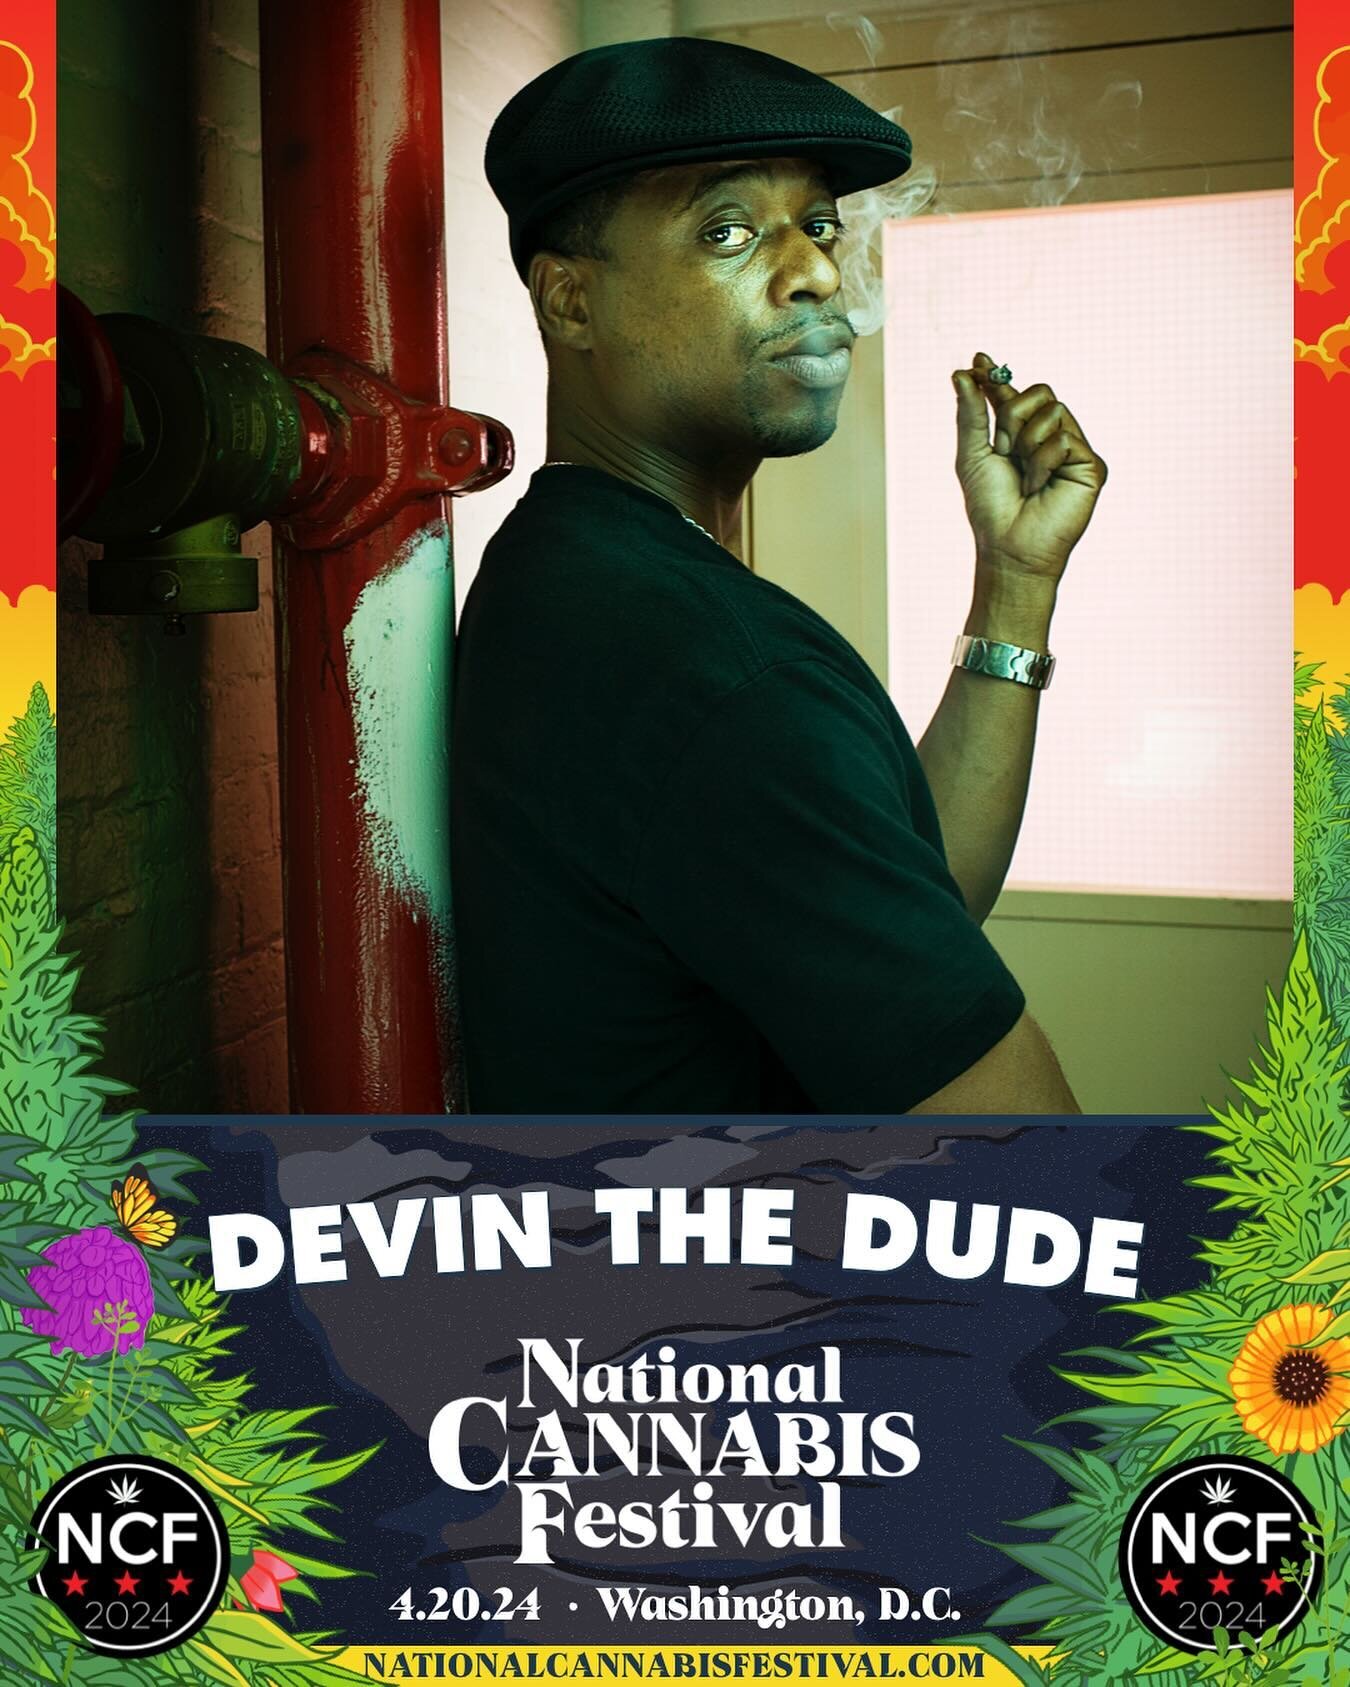 You asked for @devindude420 and finally he&rsquo;s here! 🔥 Show some love to the legendary MC and producer, the definition of smooth flow, not to mention high-larious! A true &ldquo;rapper&rsquo;s rapper&rdquo; &ndash; welcome Devin The Dude to NCF 